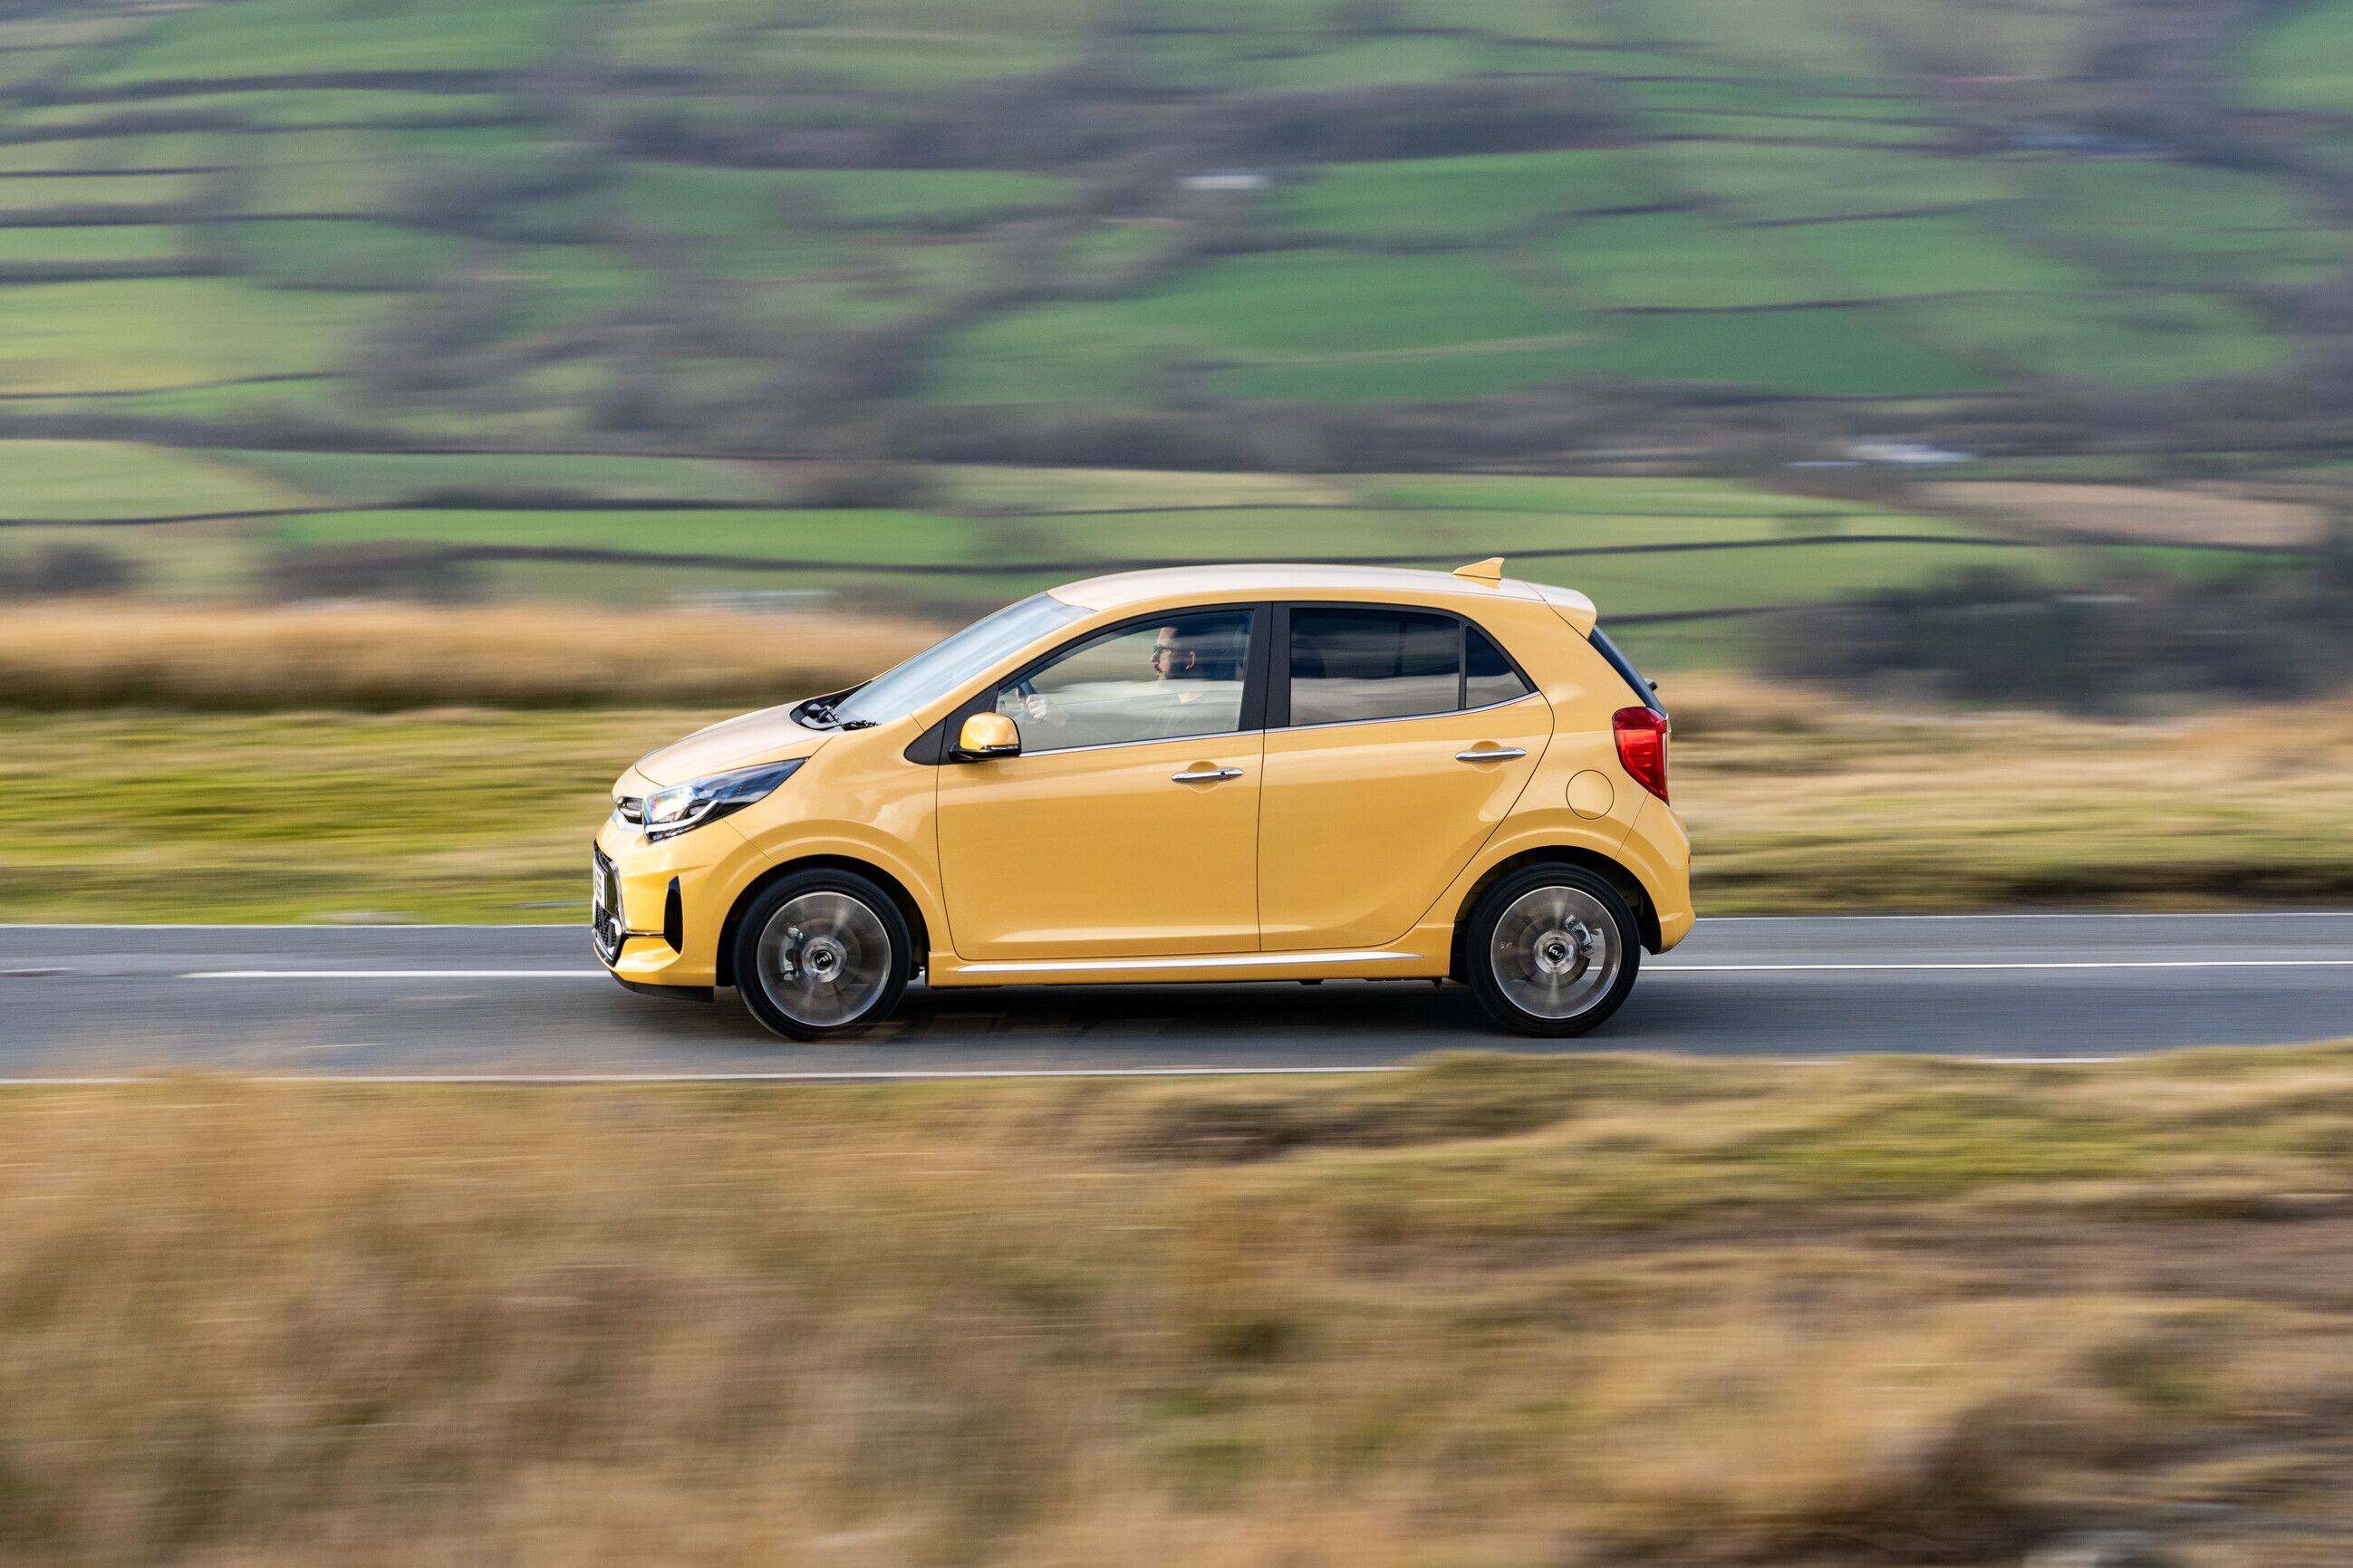 Kia Picanto GT-Line S might have only 99bhp but packs a fun-sized punch –  The Irish News